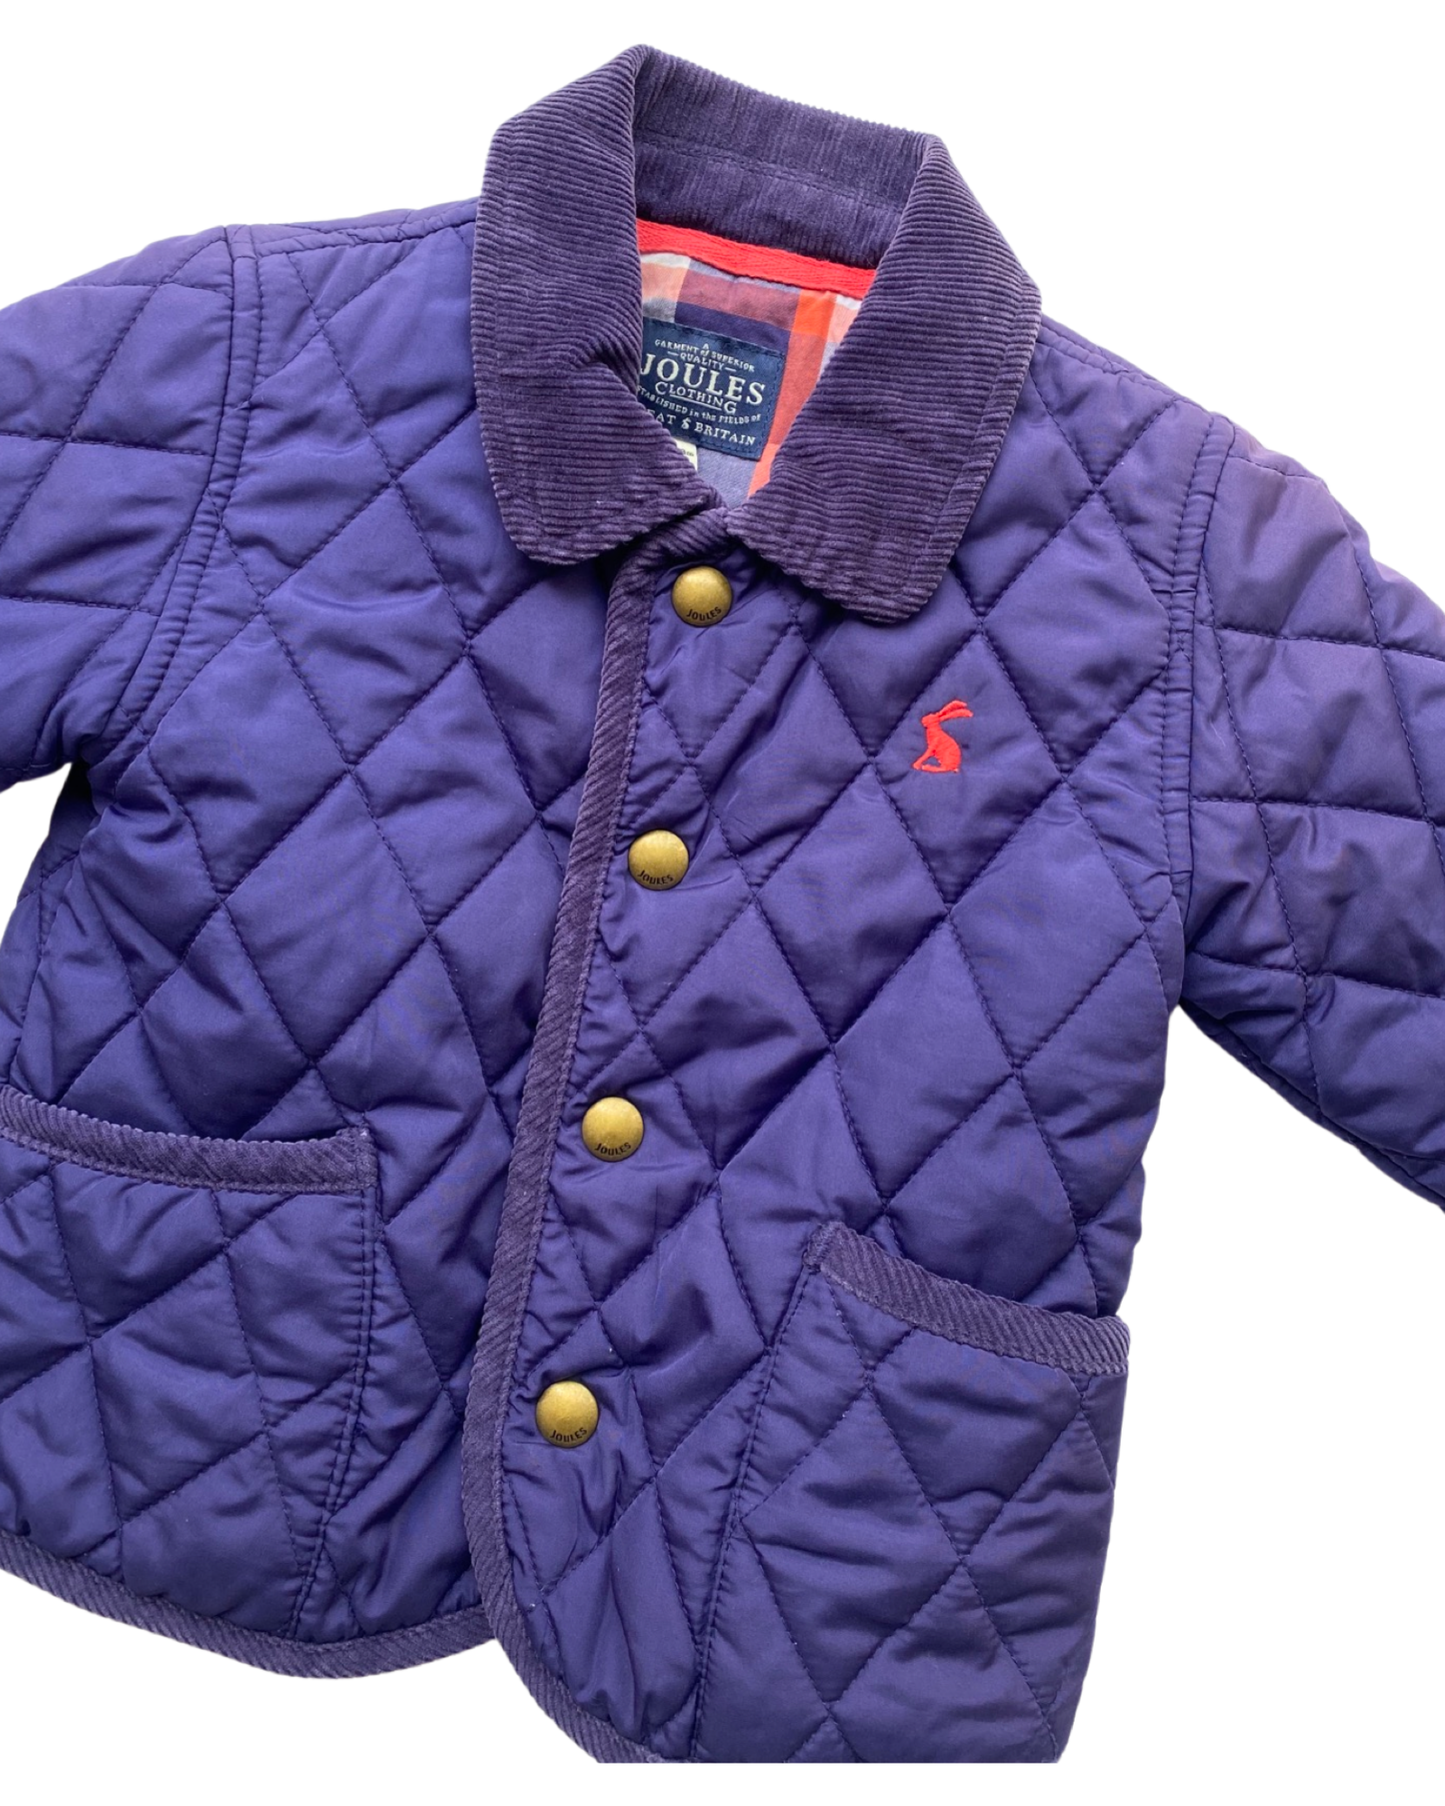 Joules navy quilted baby jacket (12-18mths)